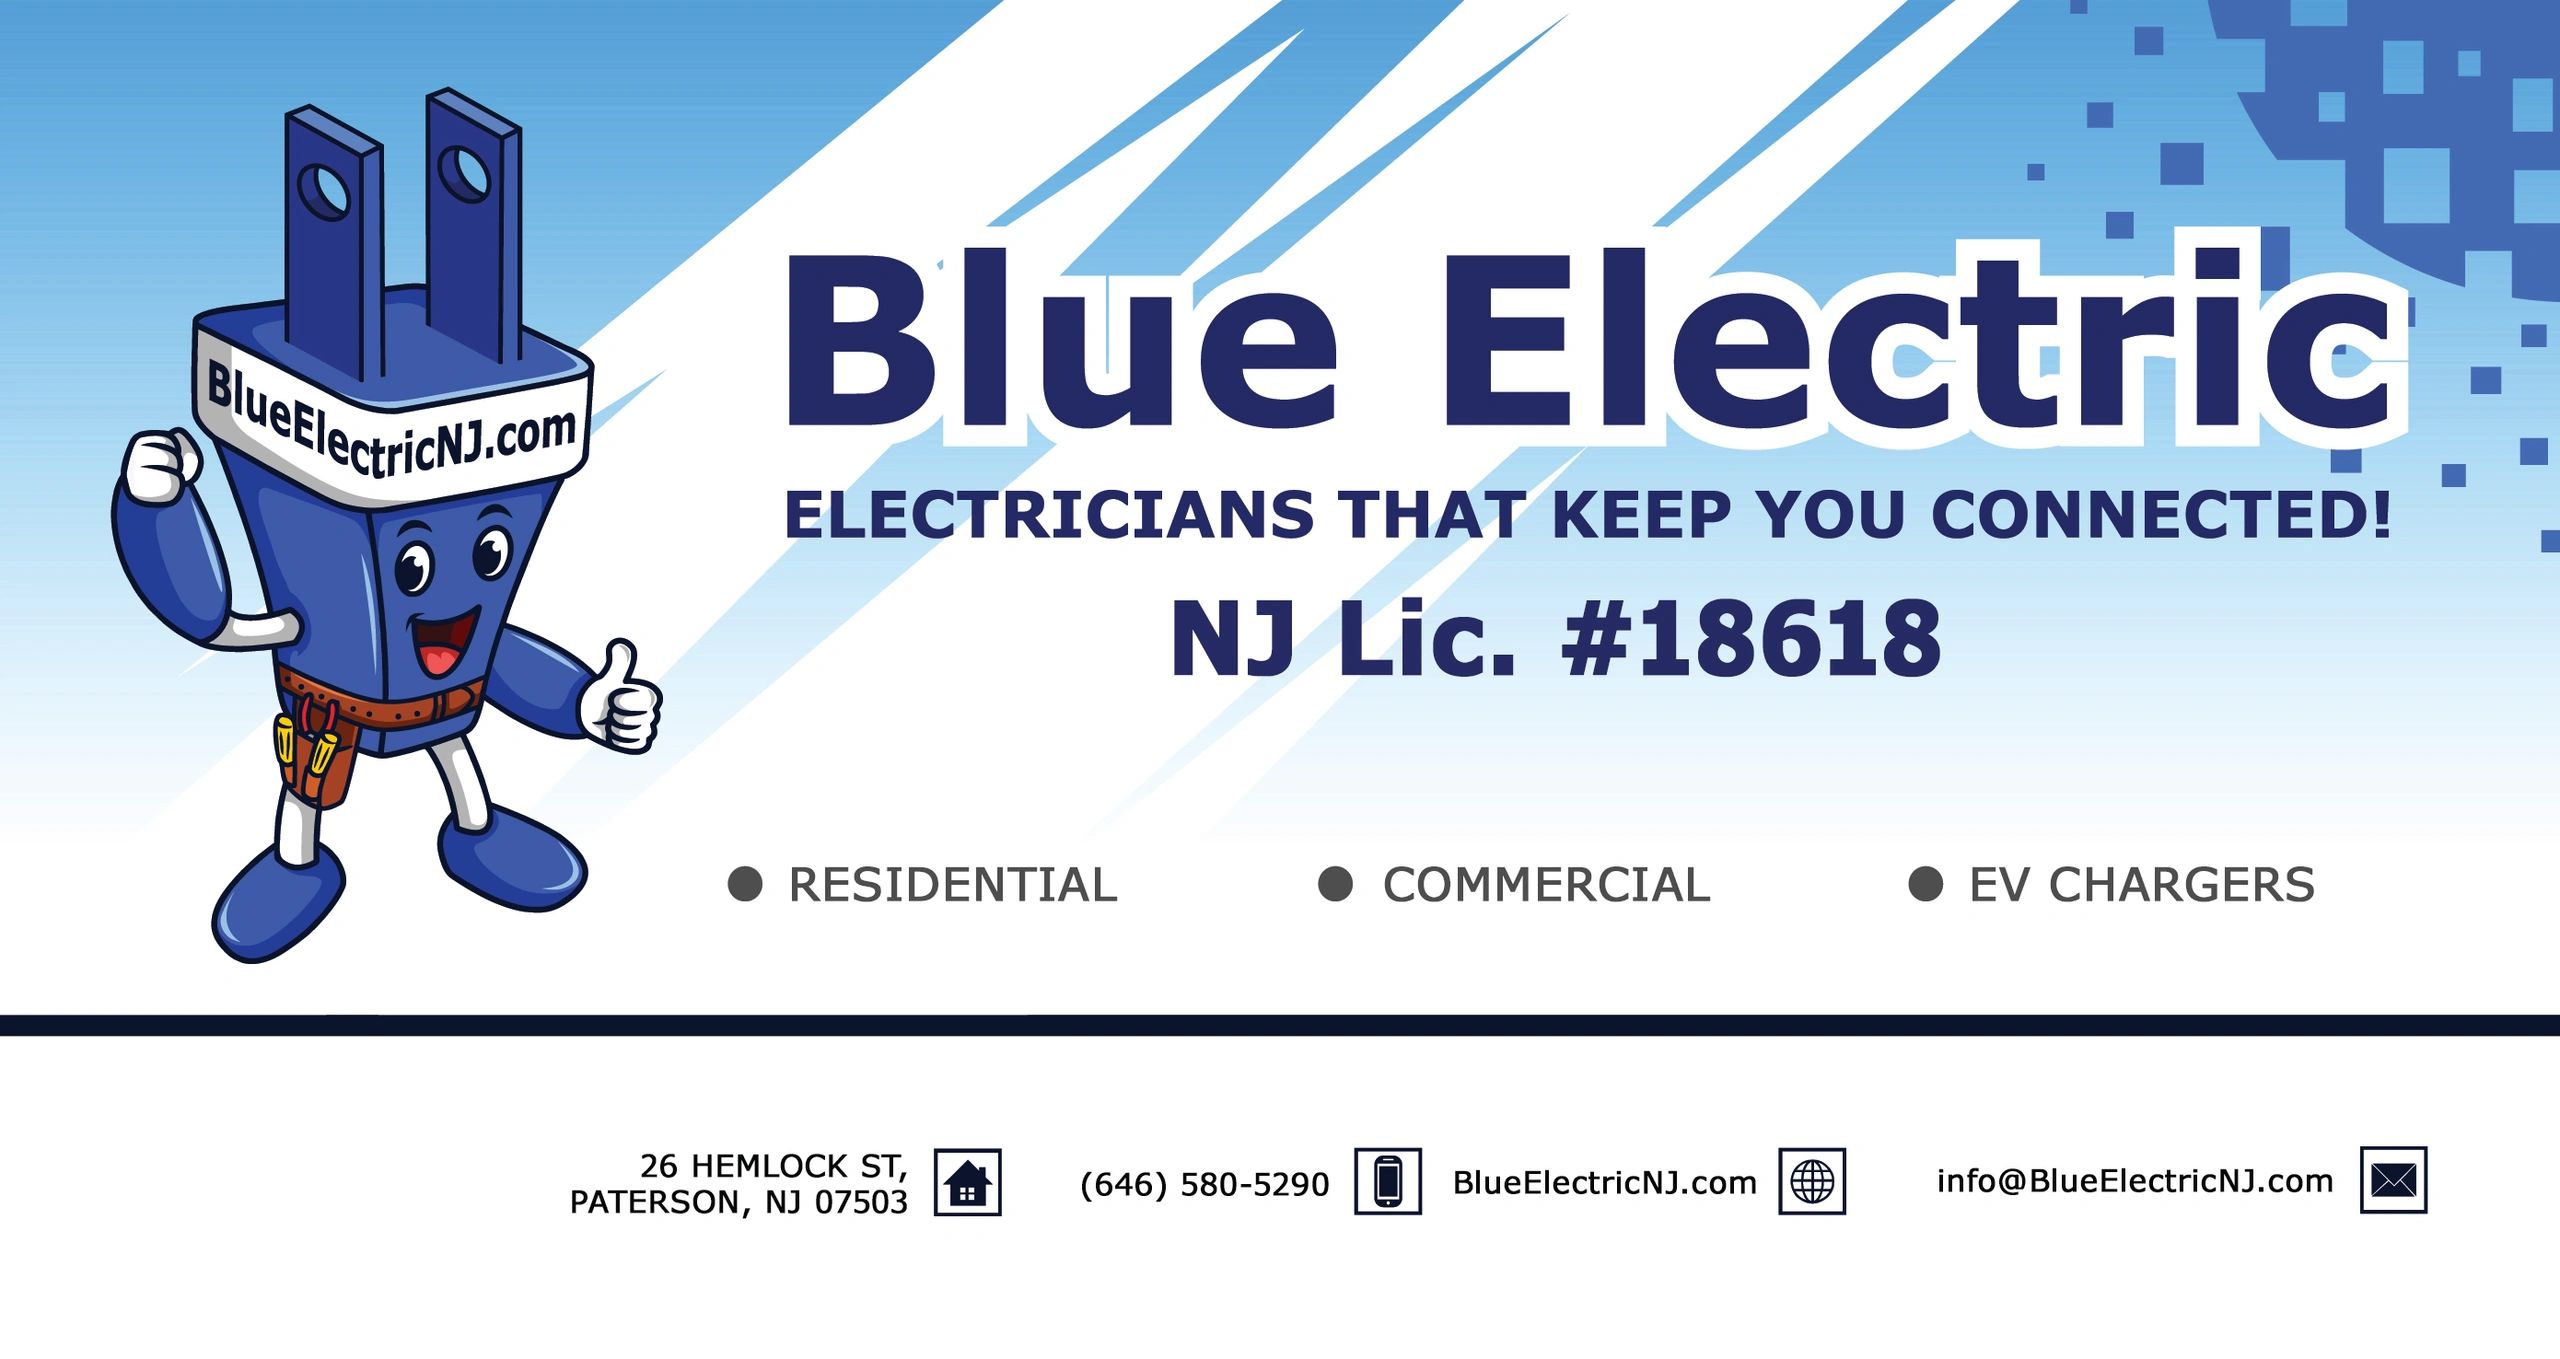 Licensed Electrician, Blue Electric, New Jersey, Smart Home, EV Charging, Residential Commercial